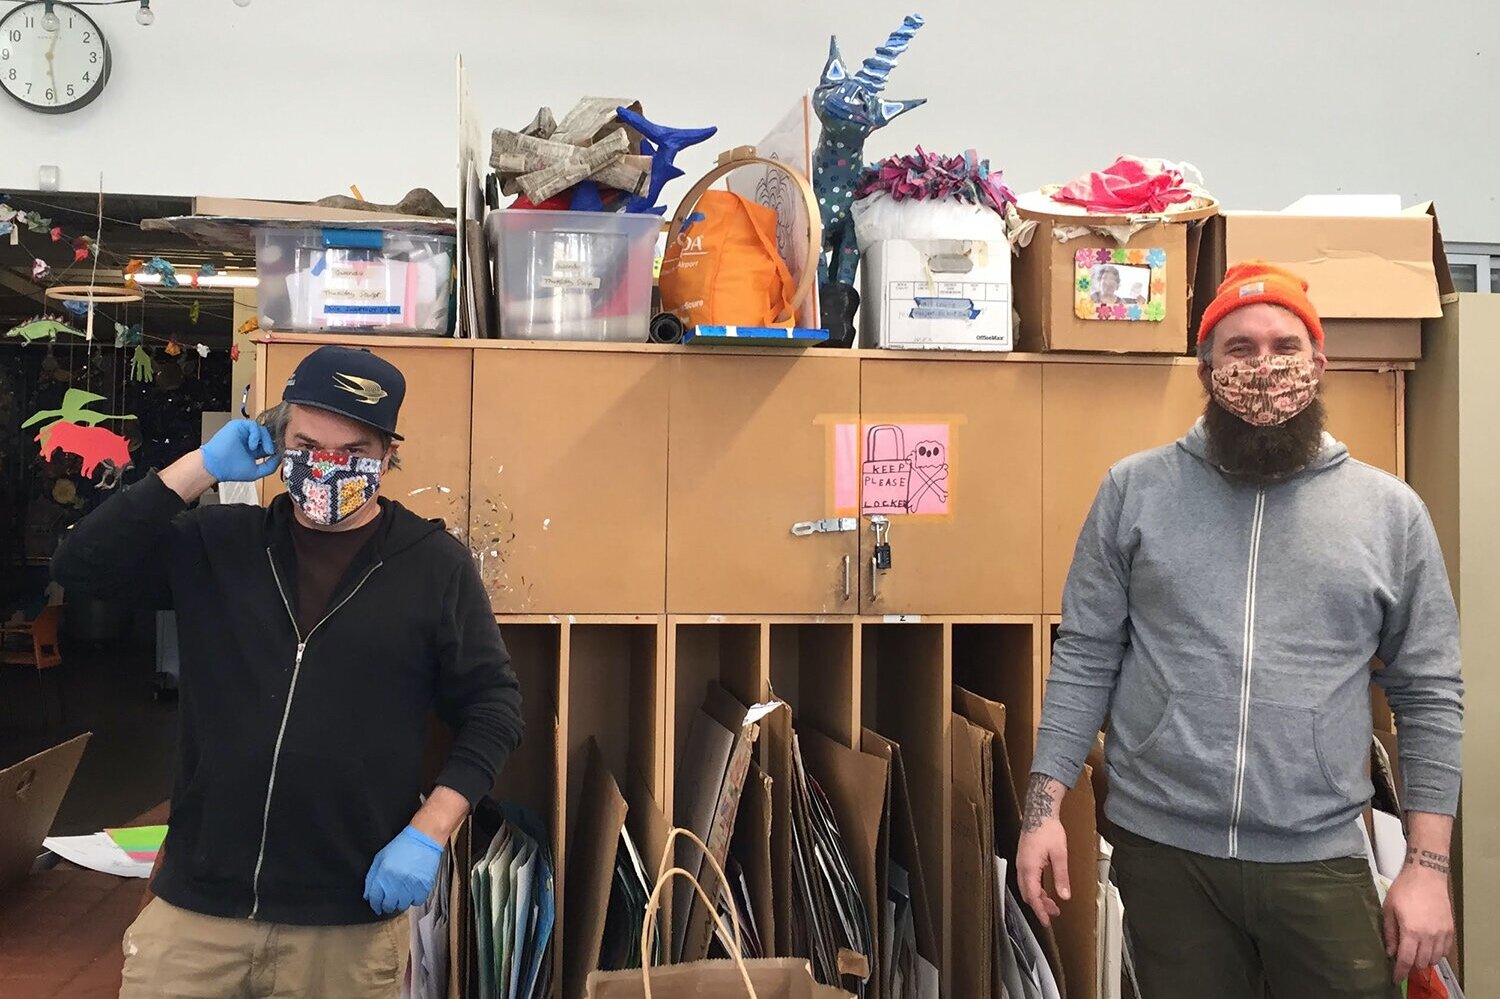 David Wiley, Studio Instructor, and Matt Dostal, Studio Director, packing up art supplies for delivery